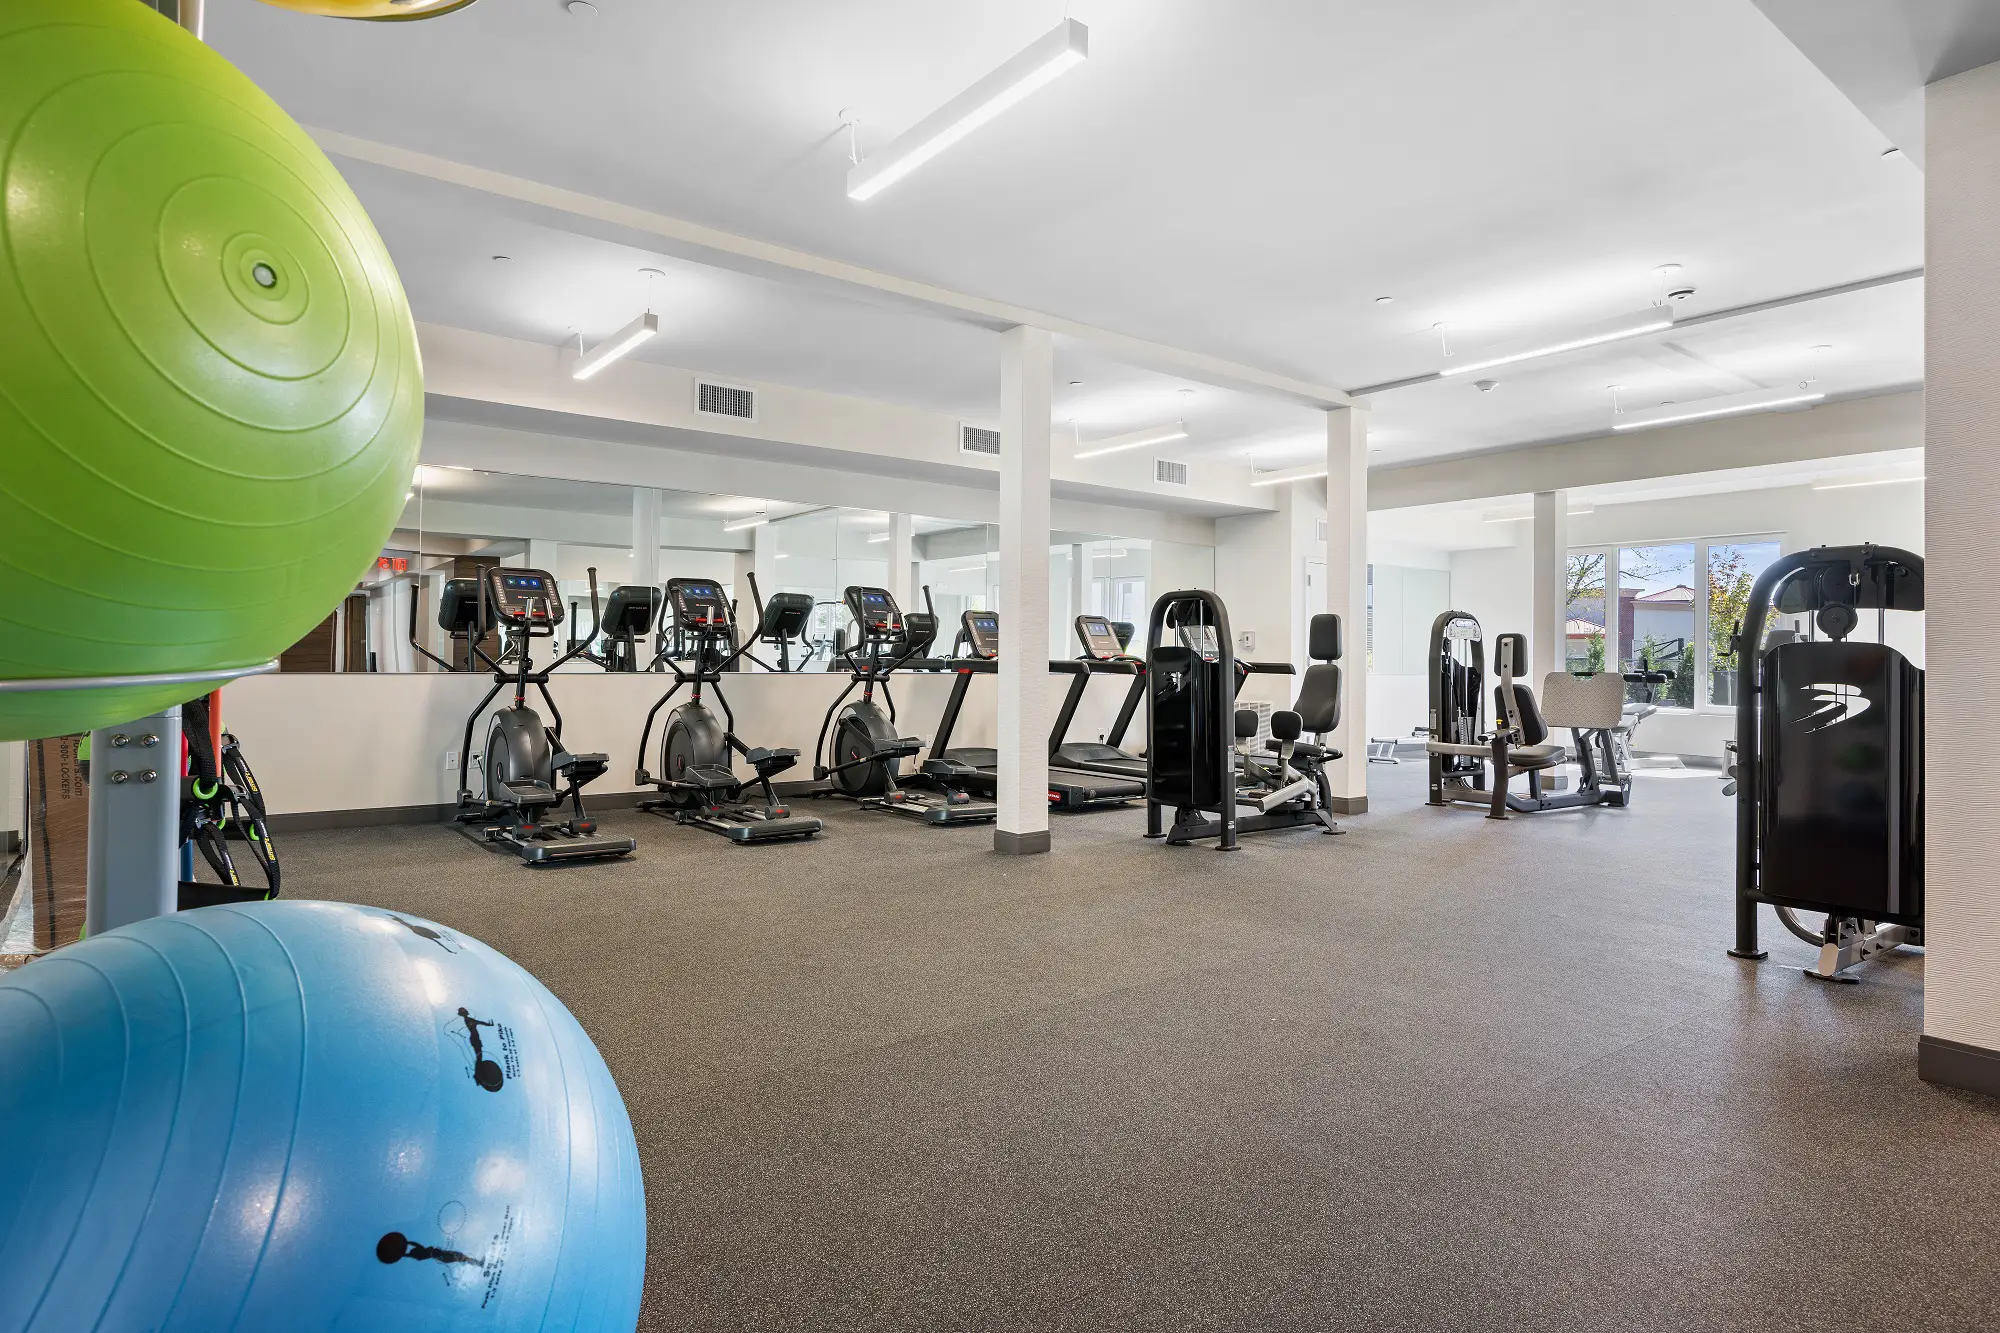 The Beacon fitness center with cardio and weight machines, yoga balls, and a mirror wall